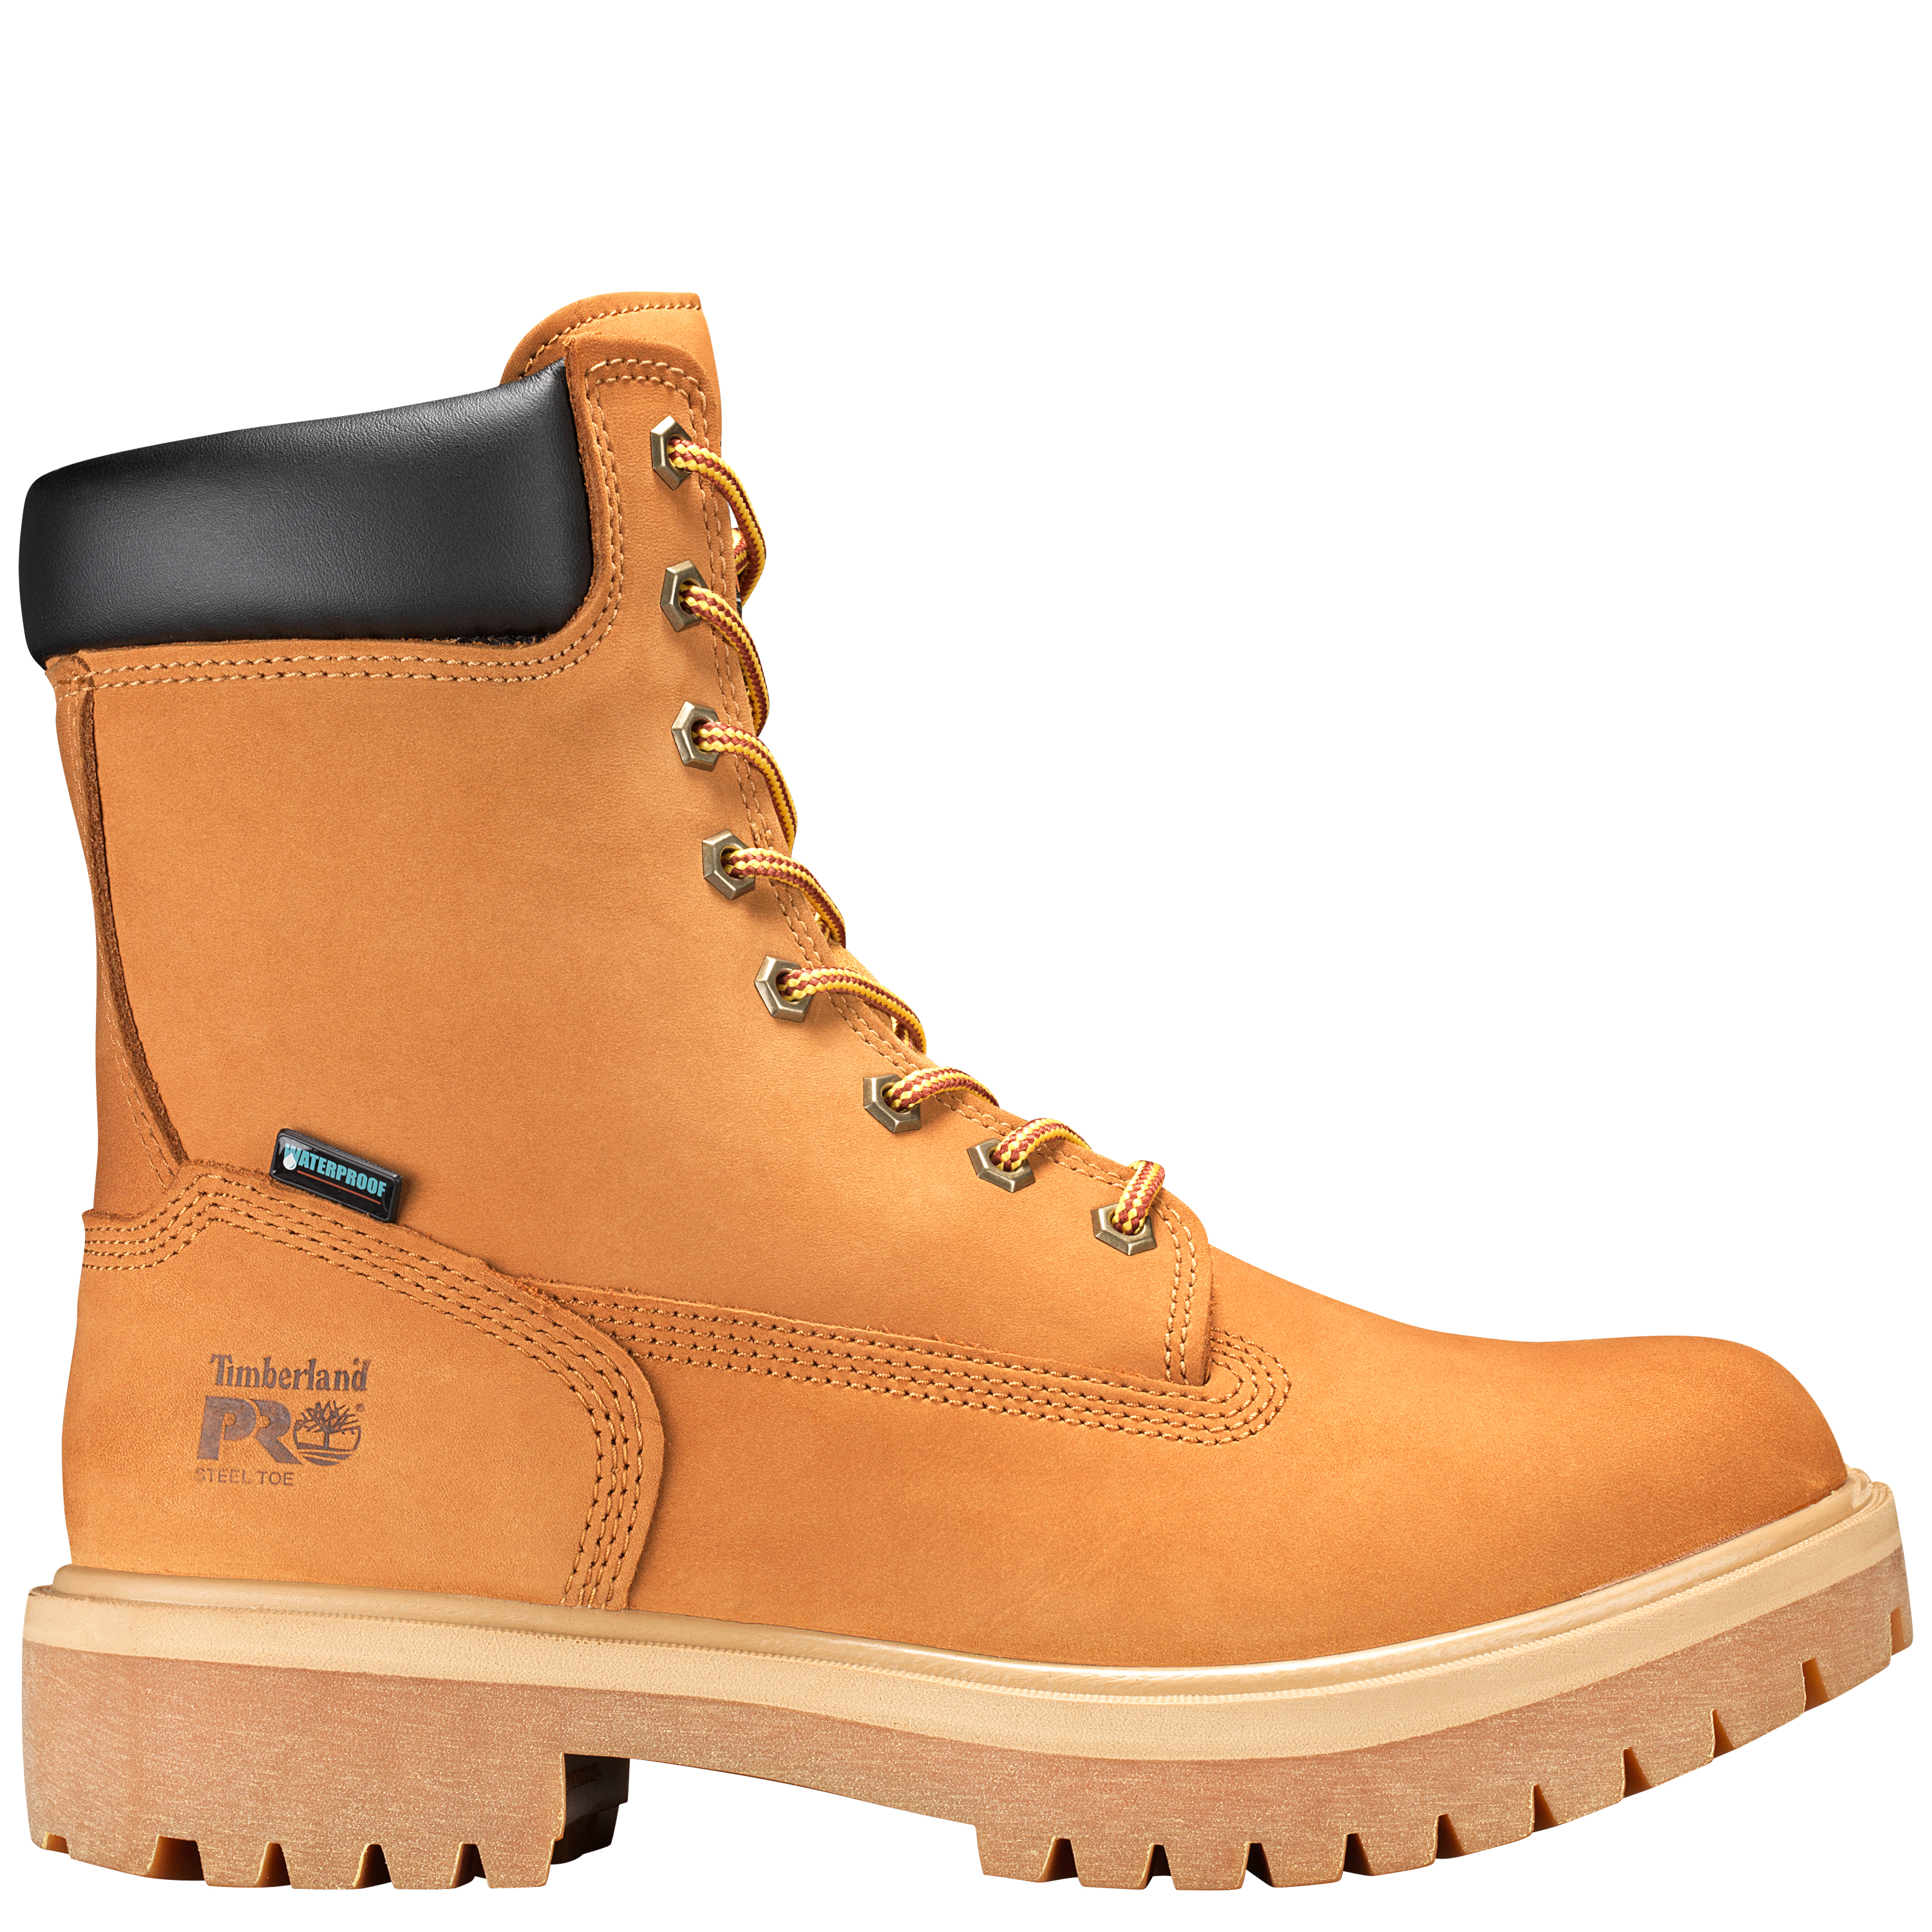 timberland pro insulated work boots